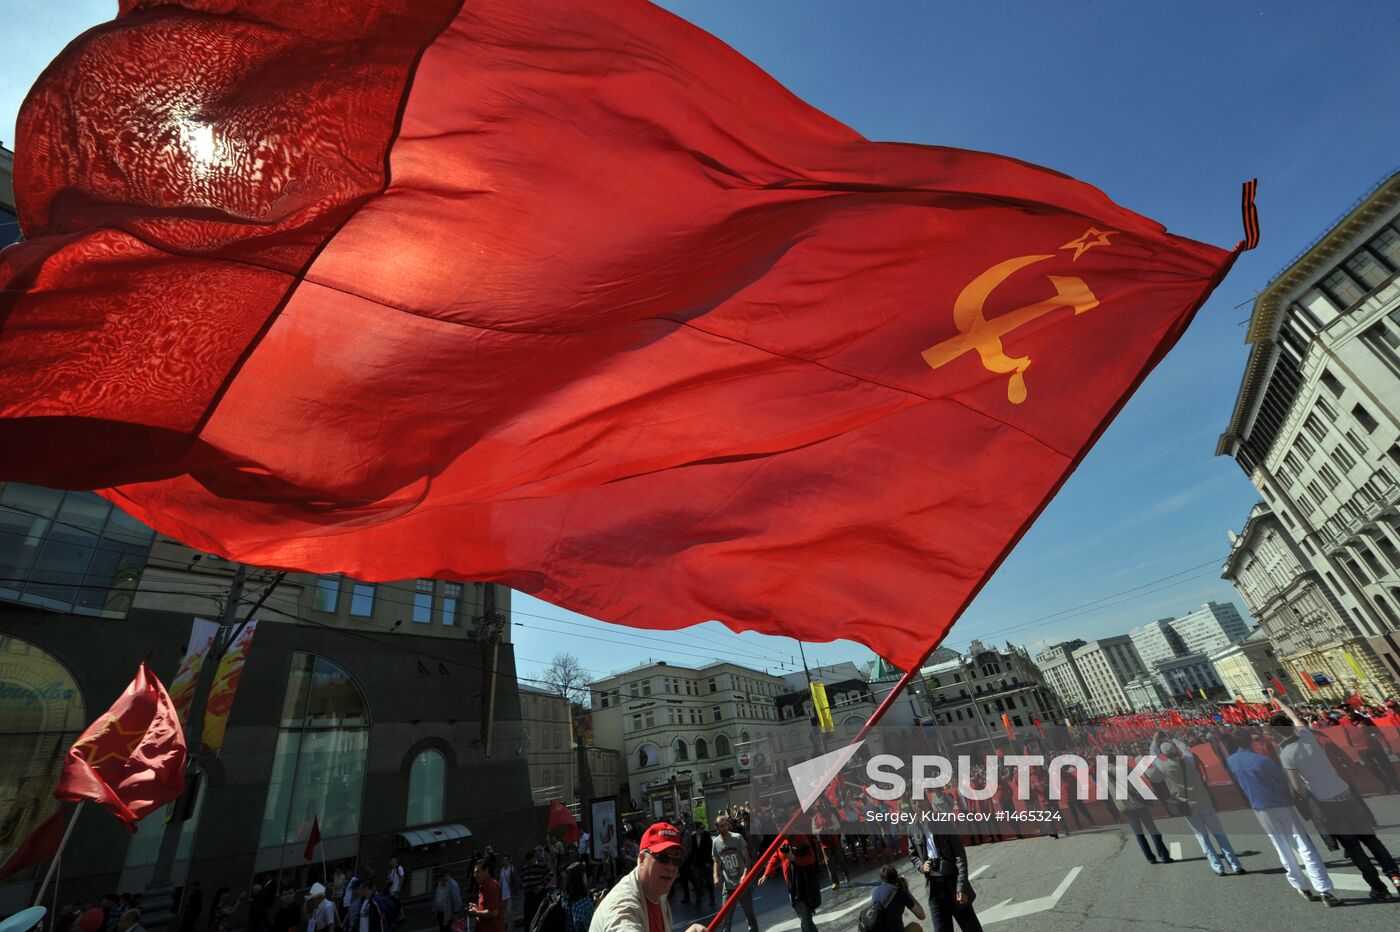 Communist Party march to celebrate USSR victory in World War II